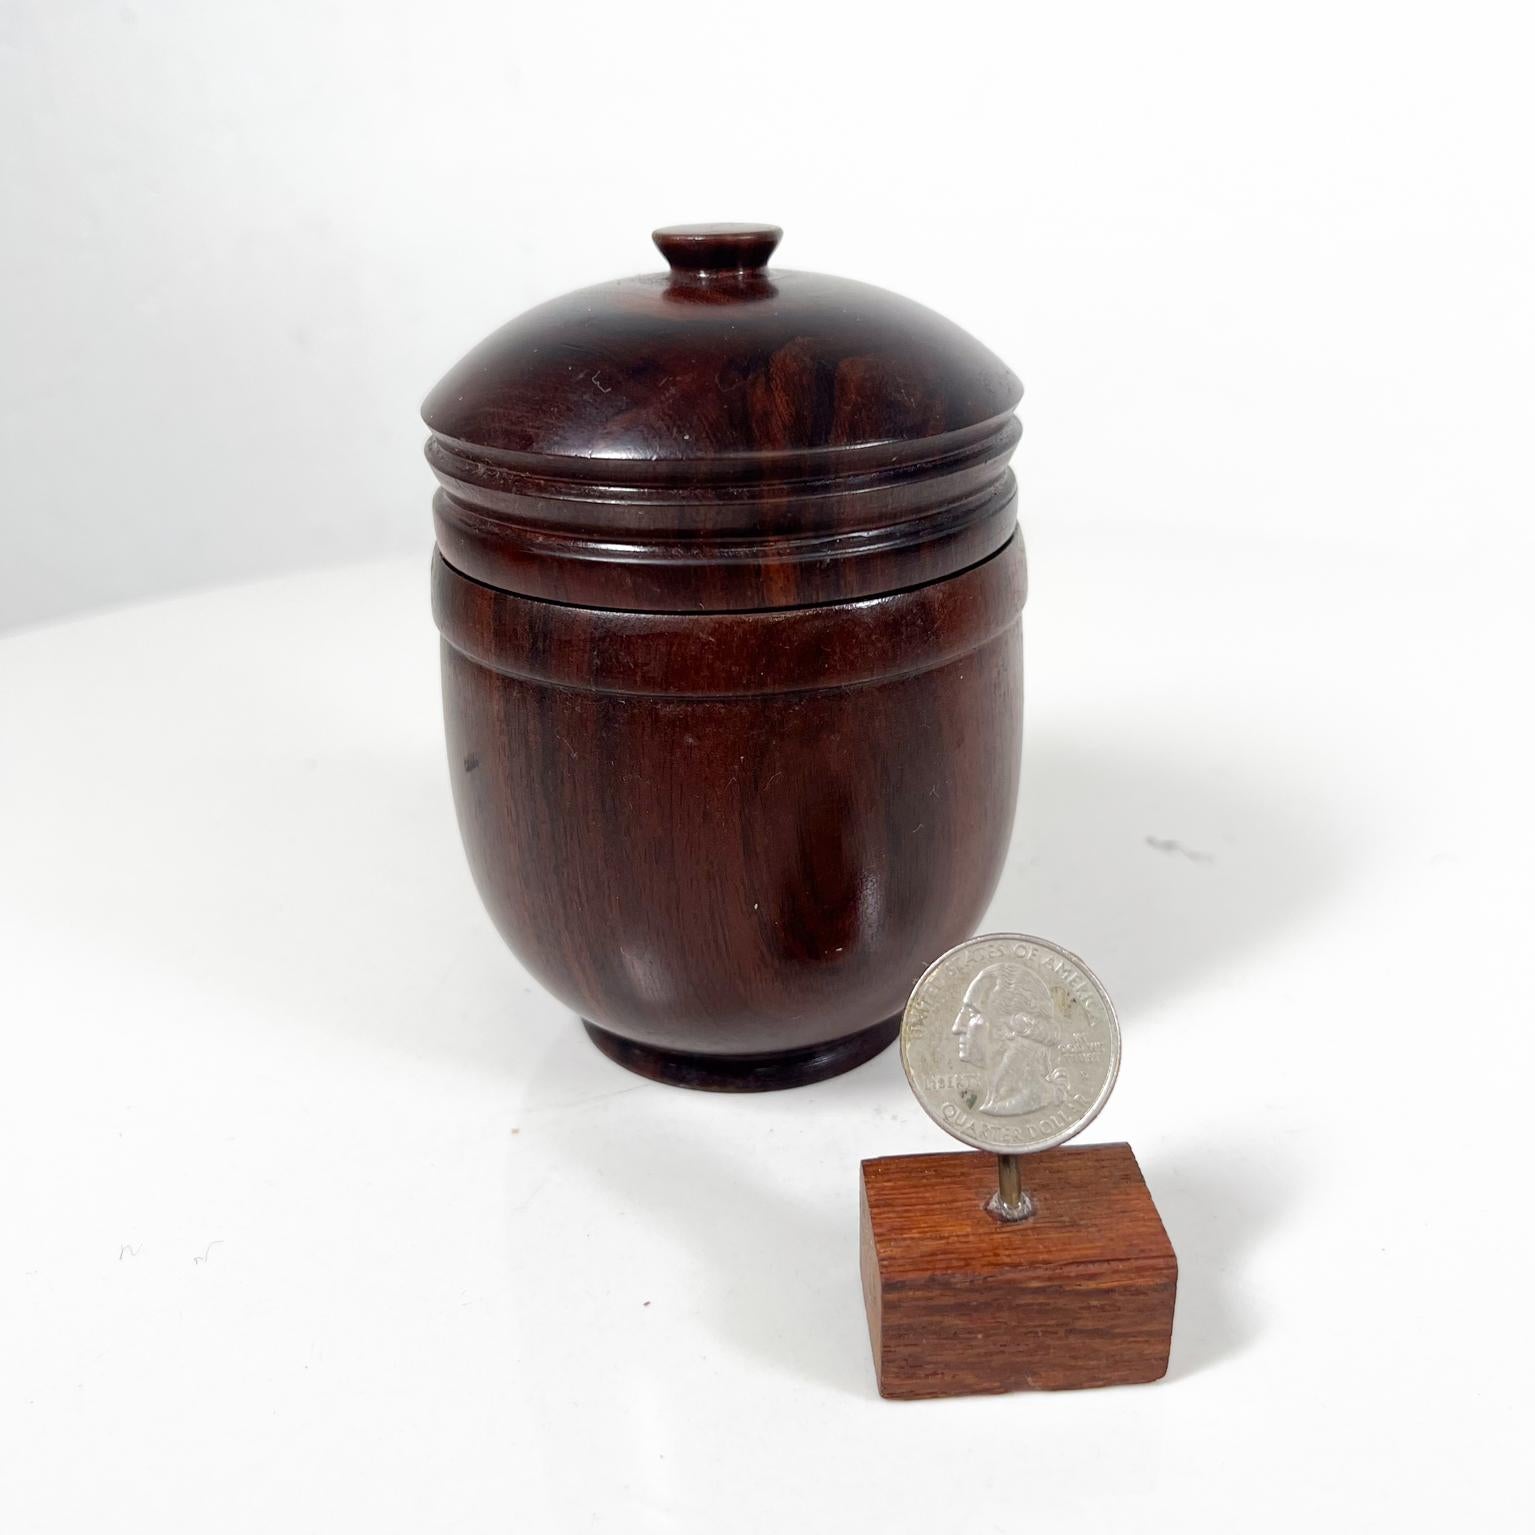 1950s Precious Rosewood Jar Petite Lidded Vessel
Mini Catch all container
3 diameter x 4.63 h
Preowned unrestored condition.
See images provided please.